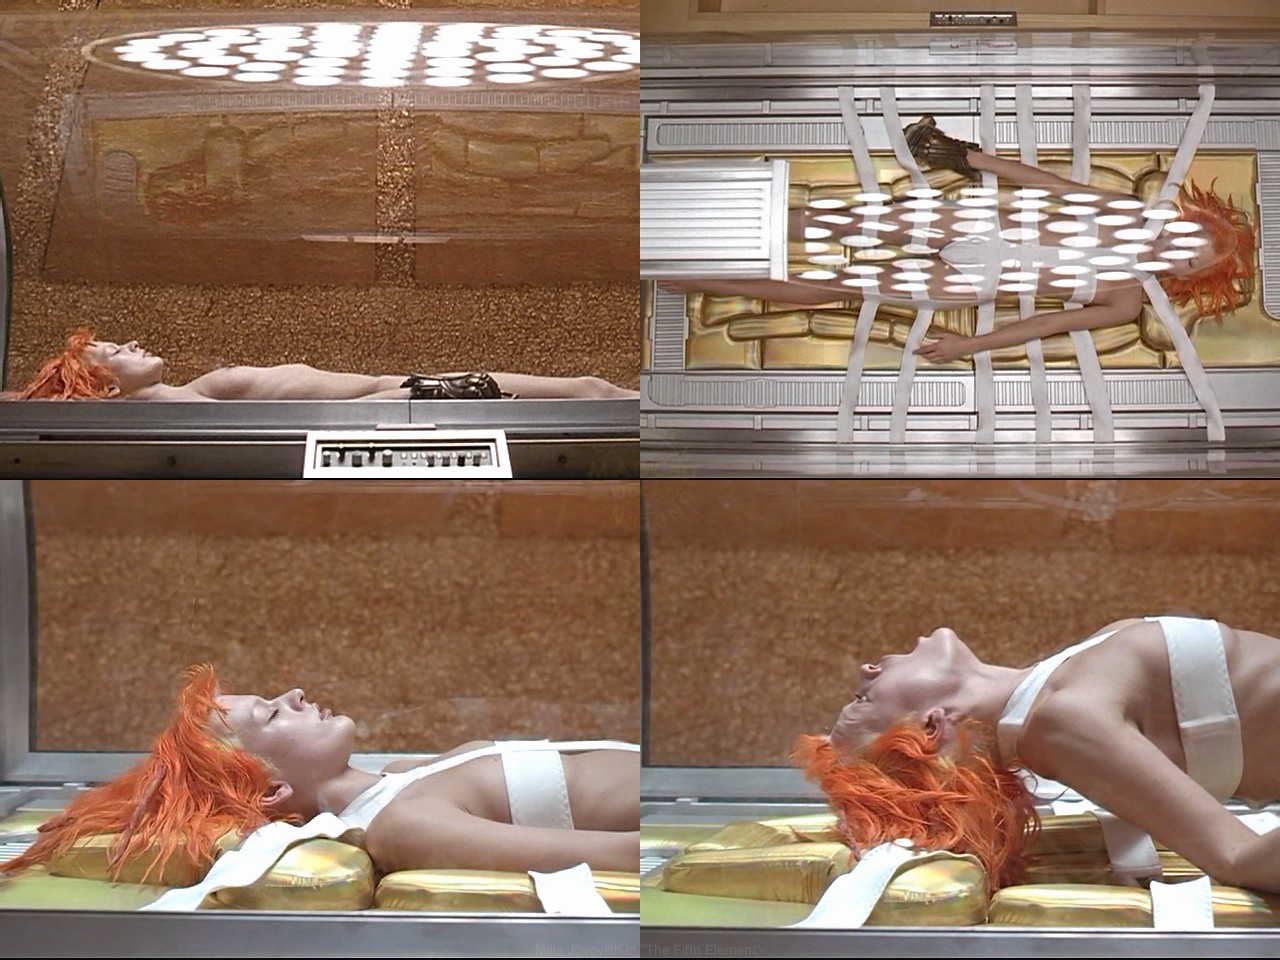 The Fifth Element nude pics.